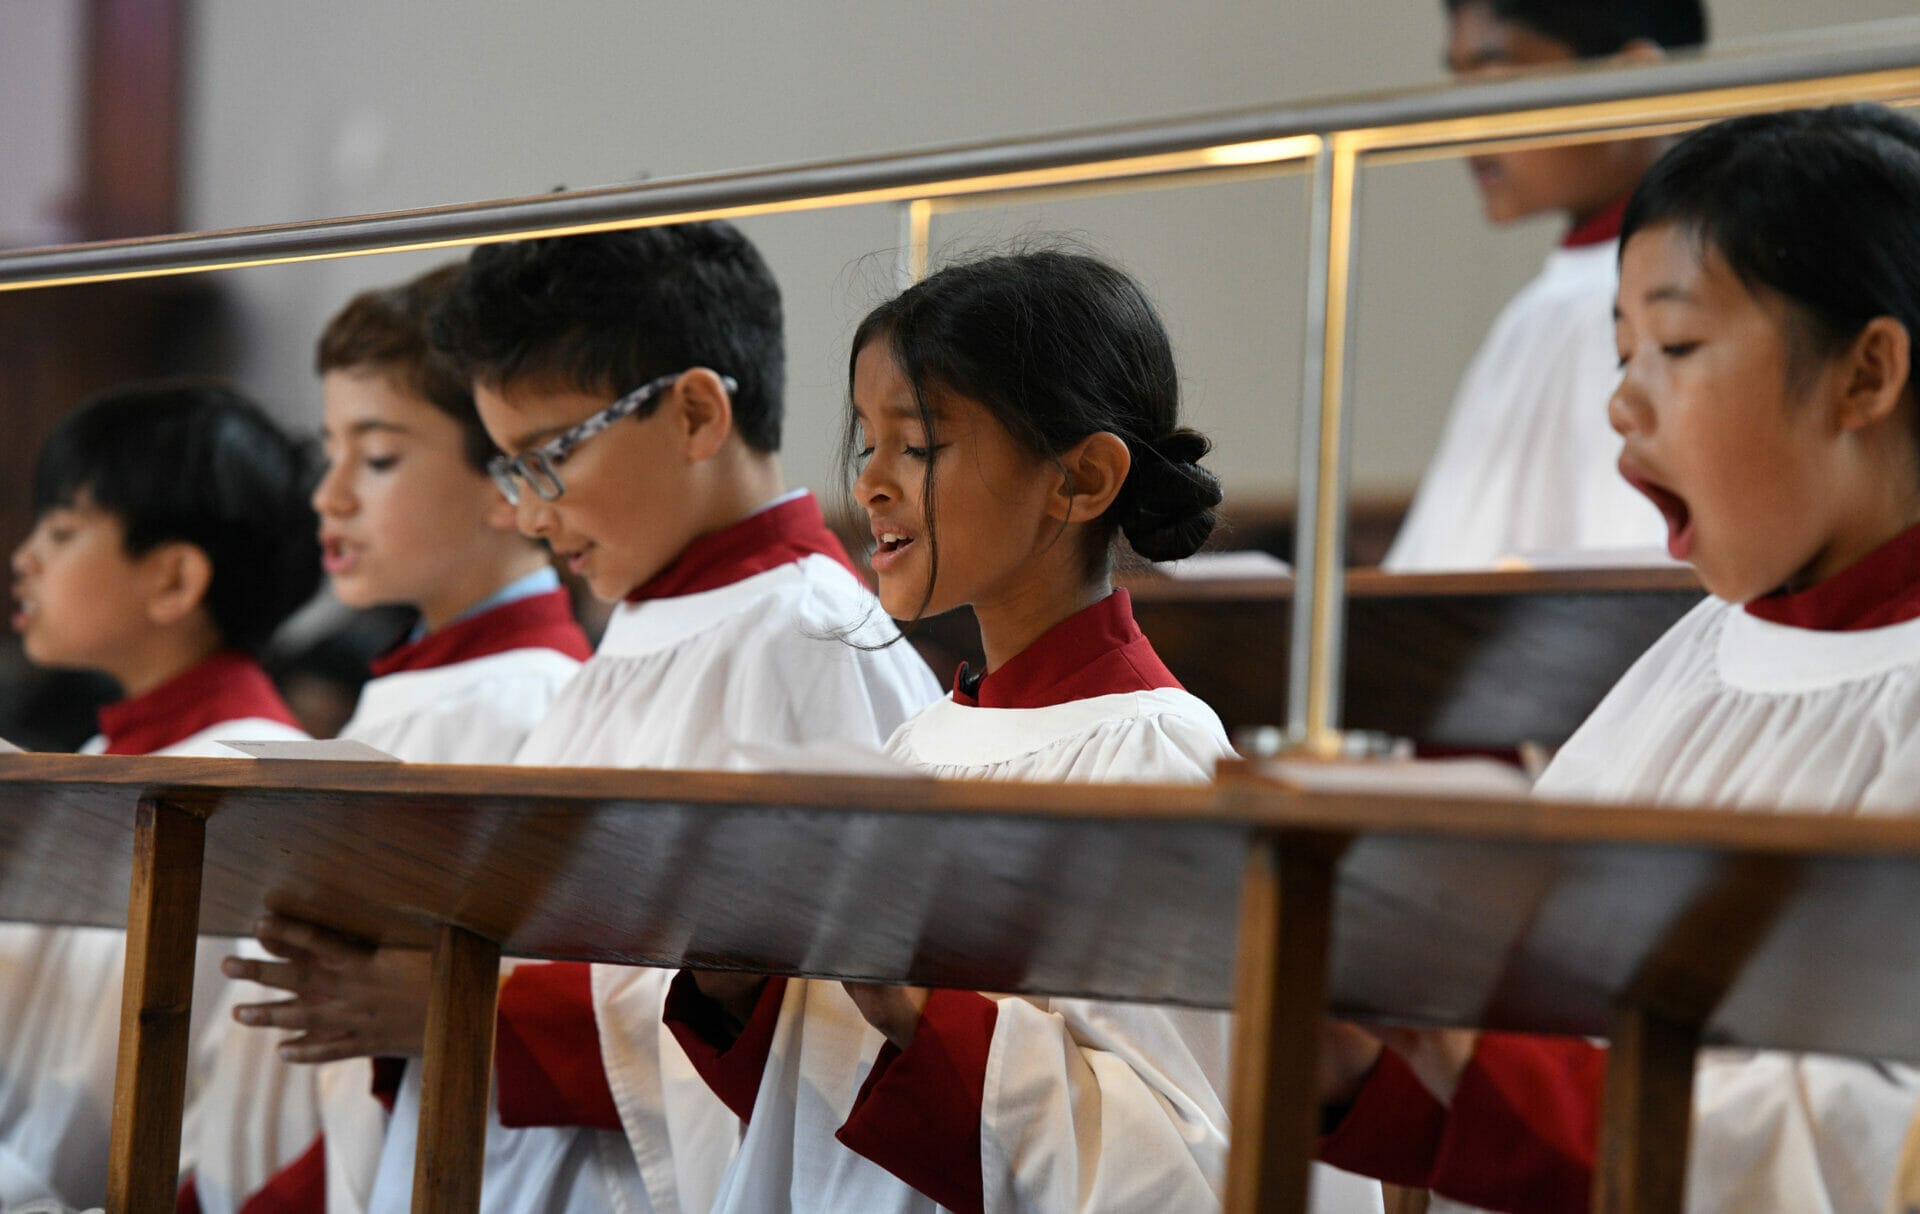 The Chapel Choir singing in their red and white robes in The Blue Coat School Chapel